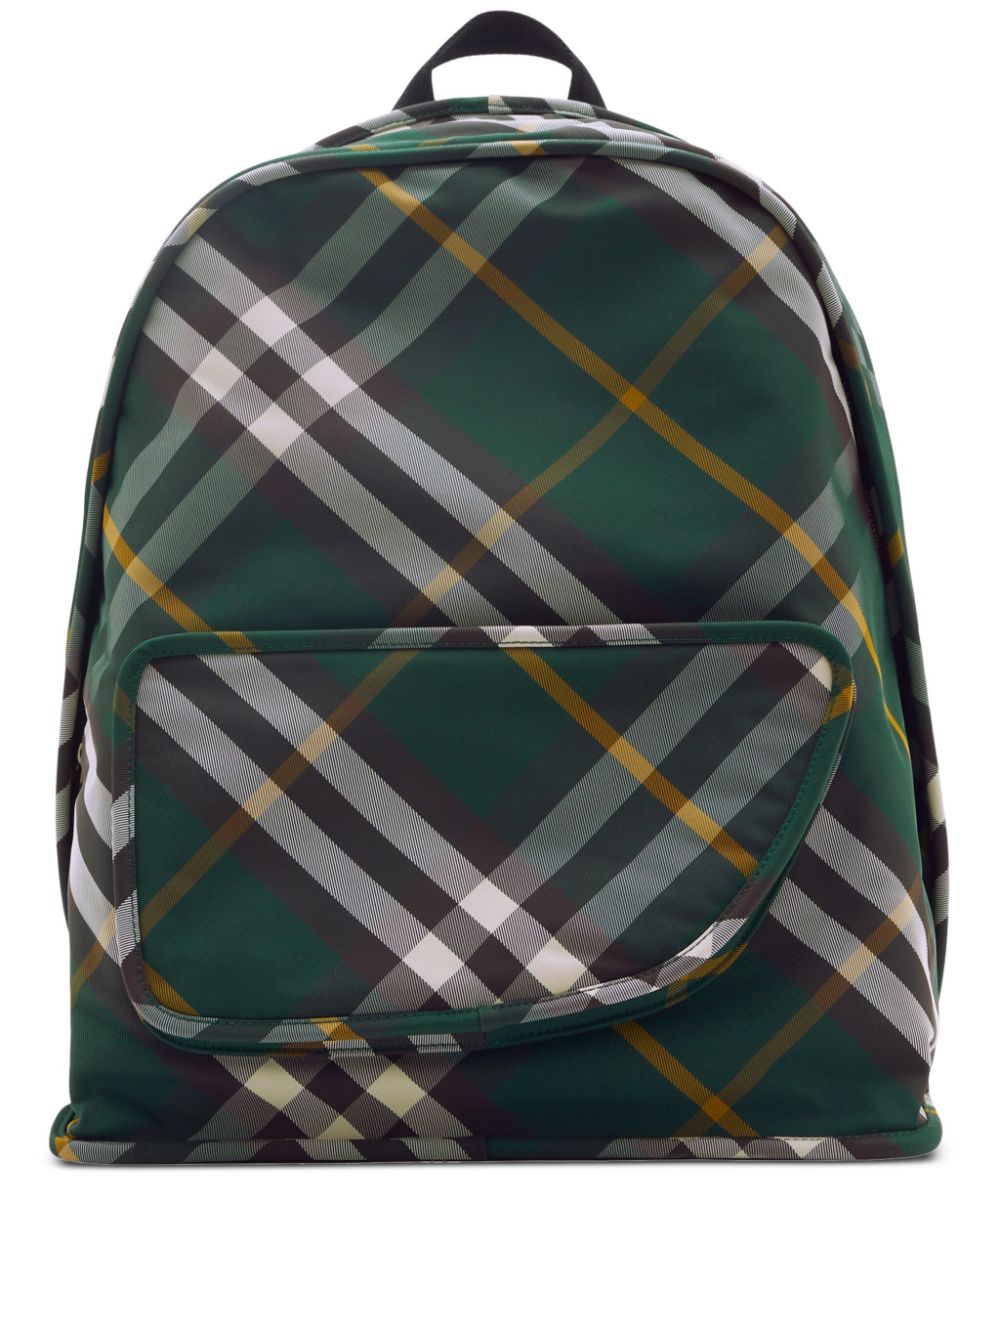 Shield checkered woven backpack<BR/><BR/><BR/>